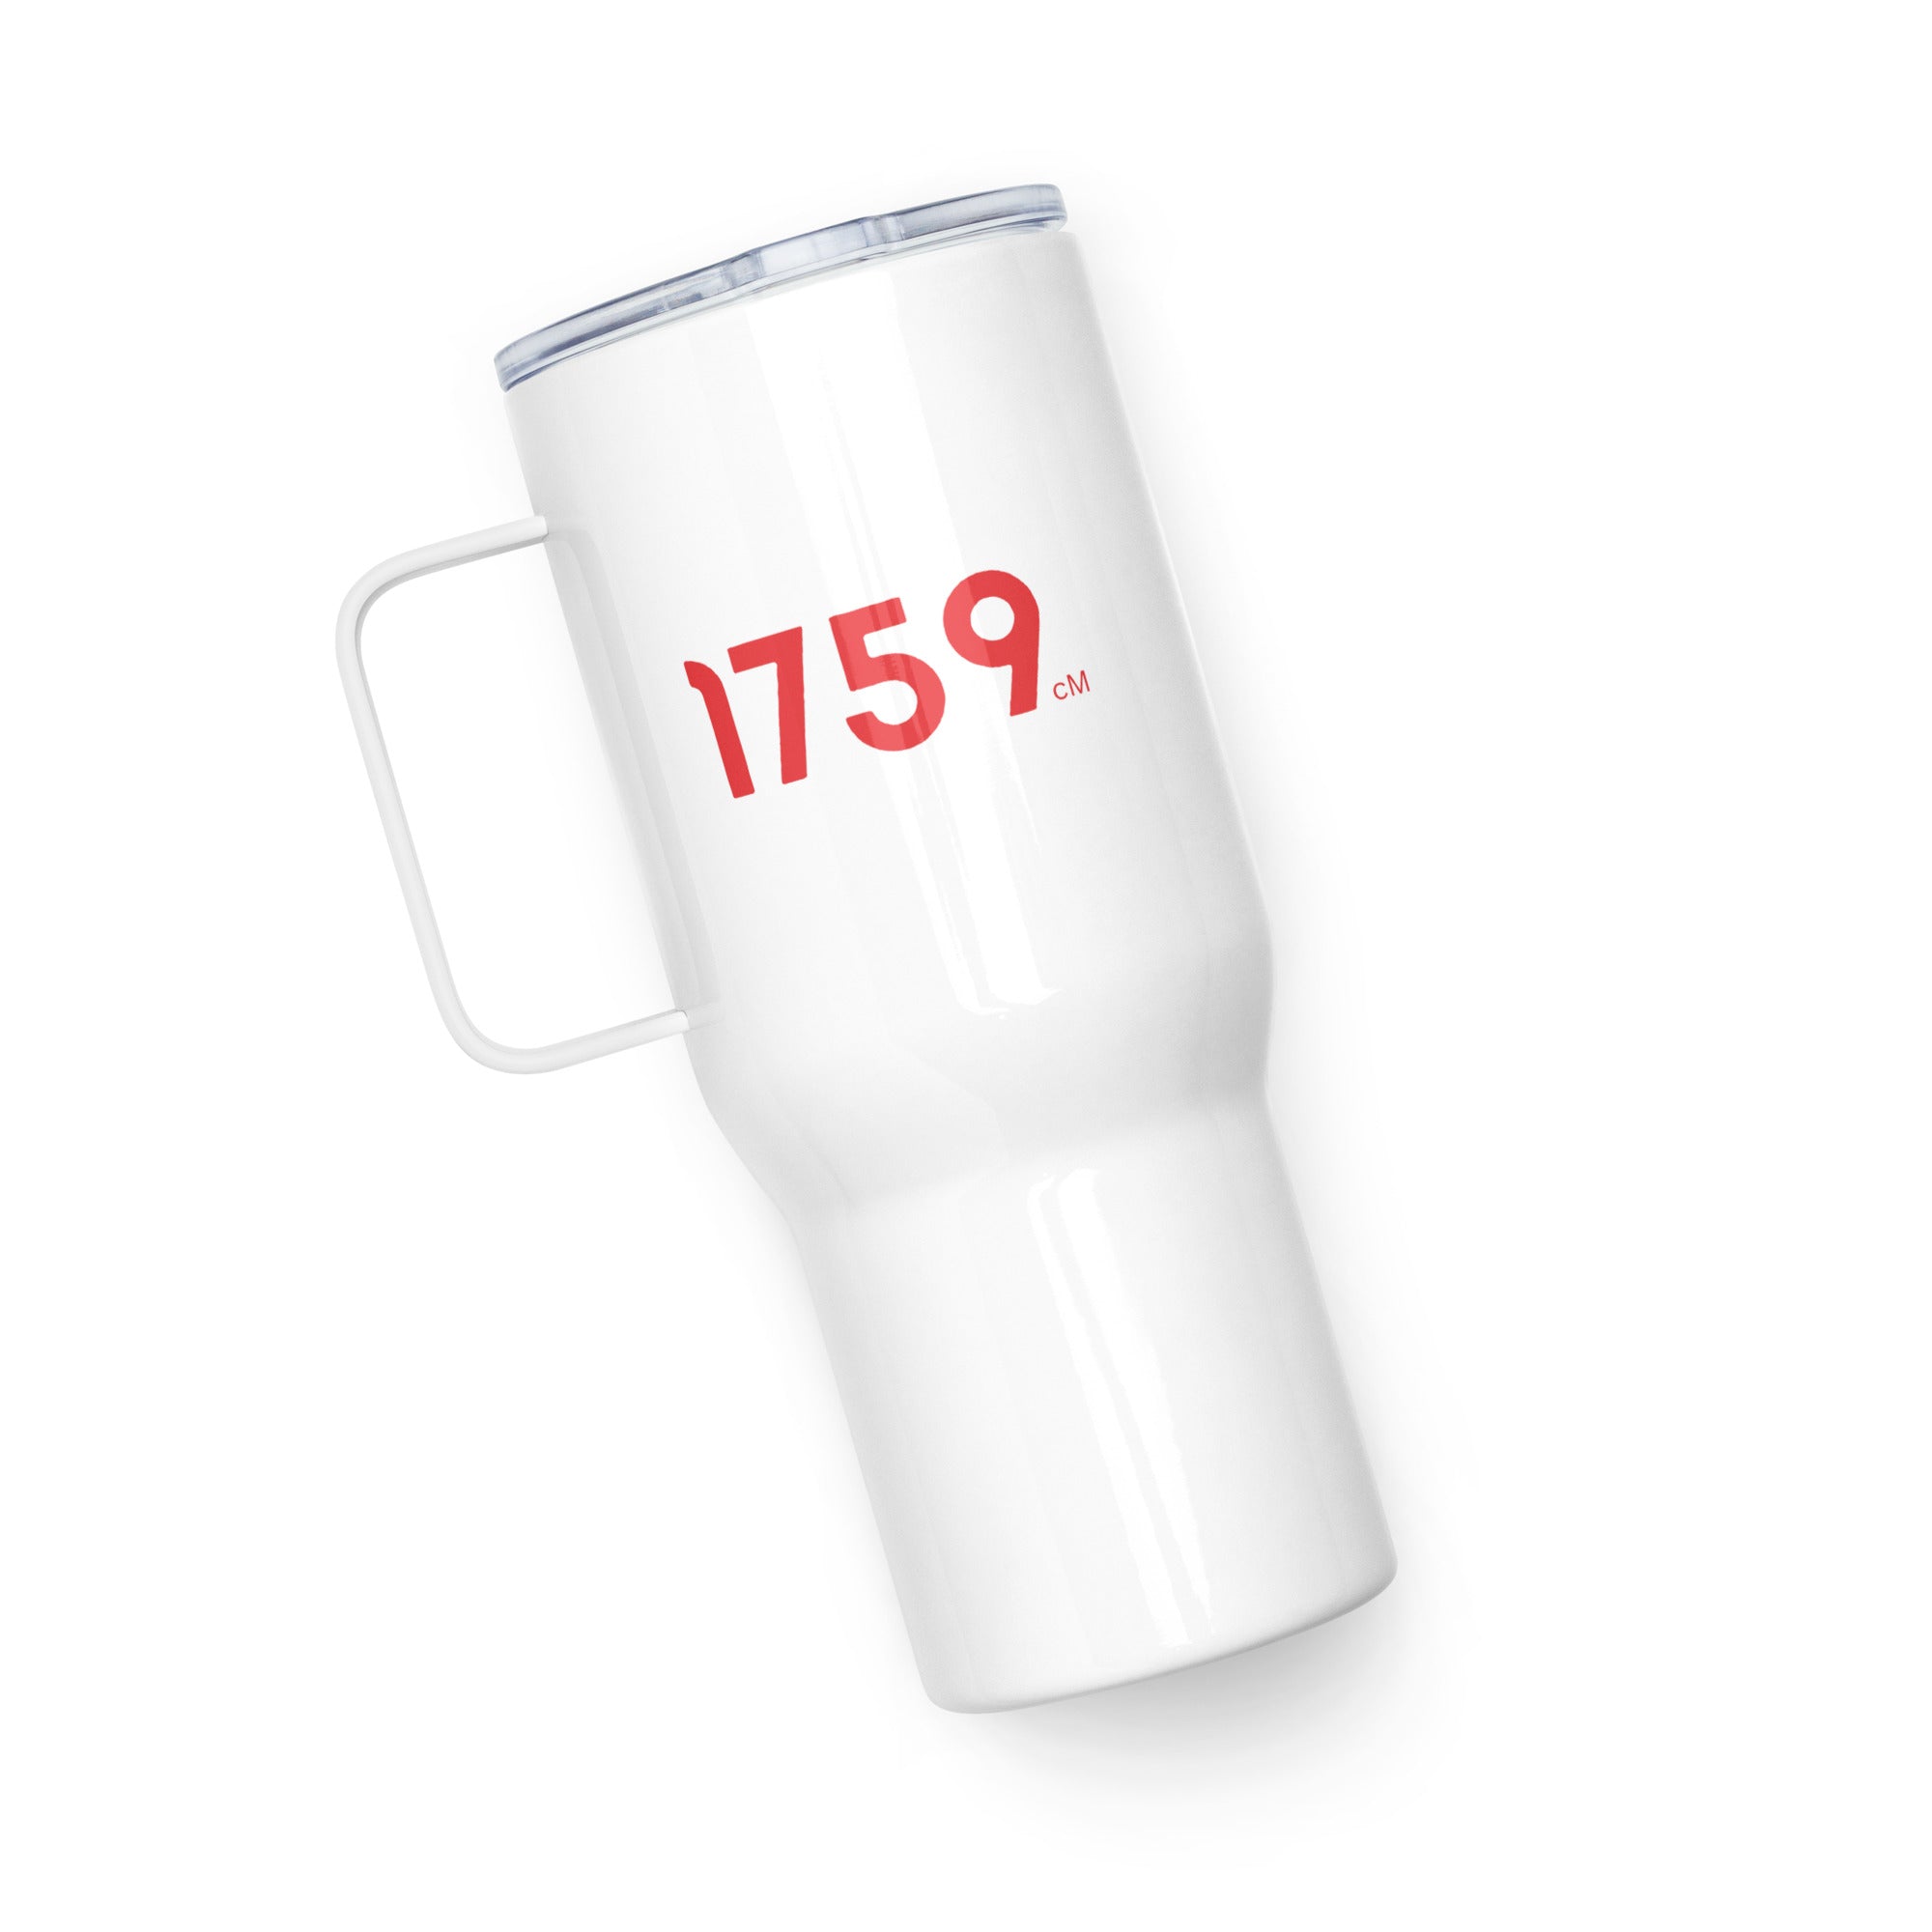 Genetic Genealogy "1/2 SIS" Travel mug with a handle Red and White